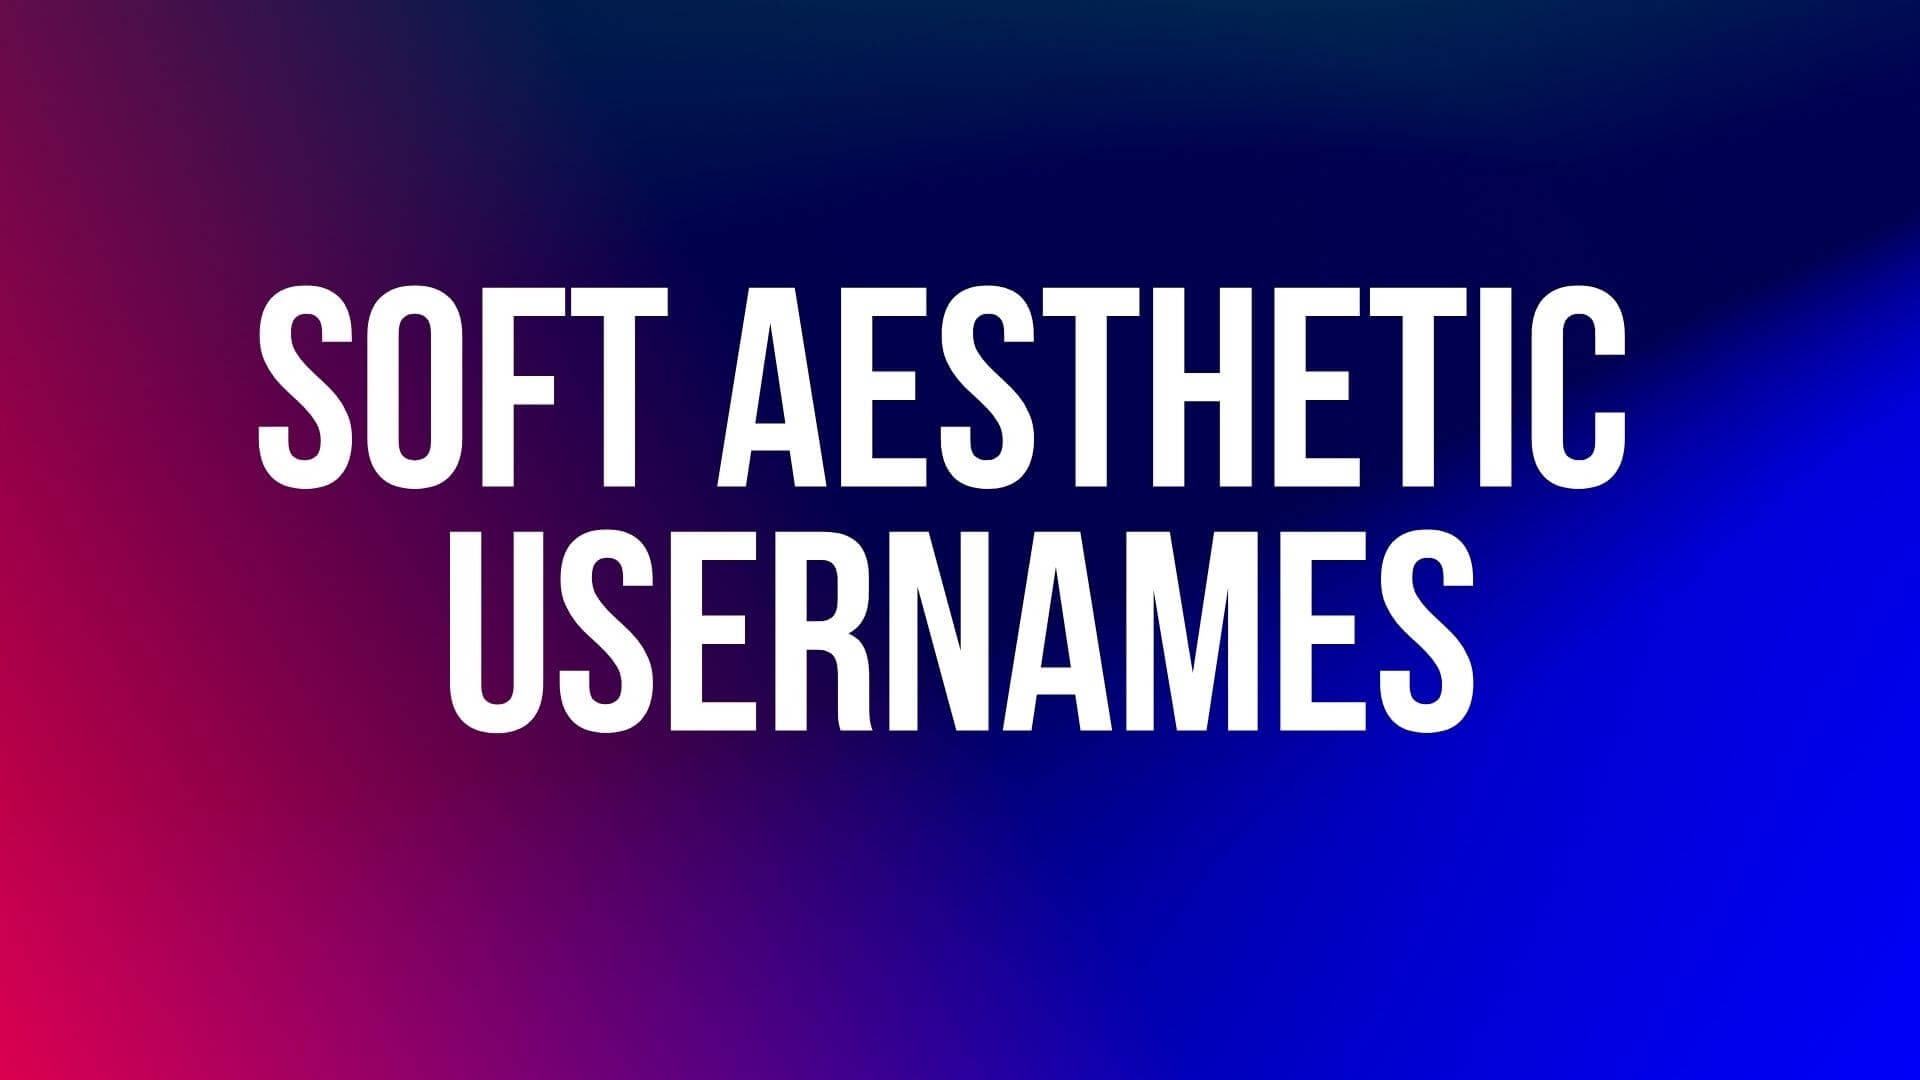 210+ Best Soft Aesthetic Usernames for You – NamesBuddy